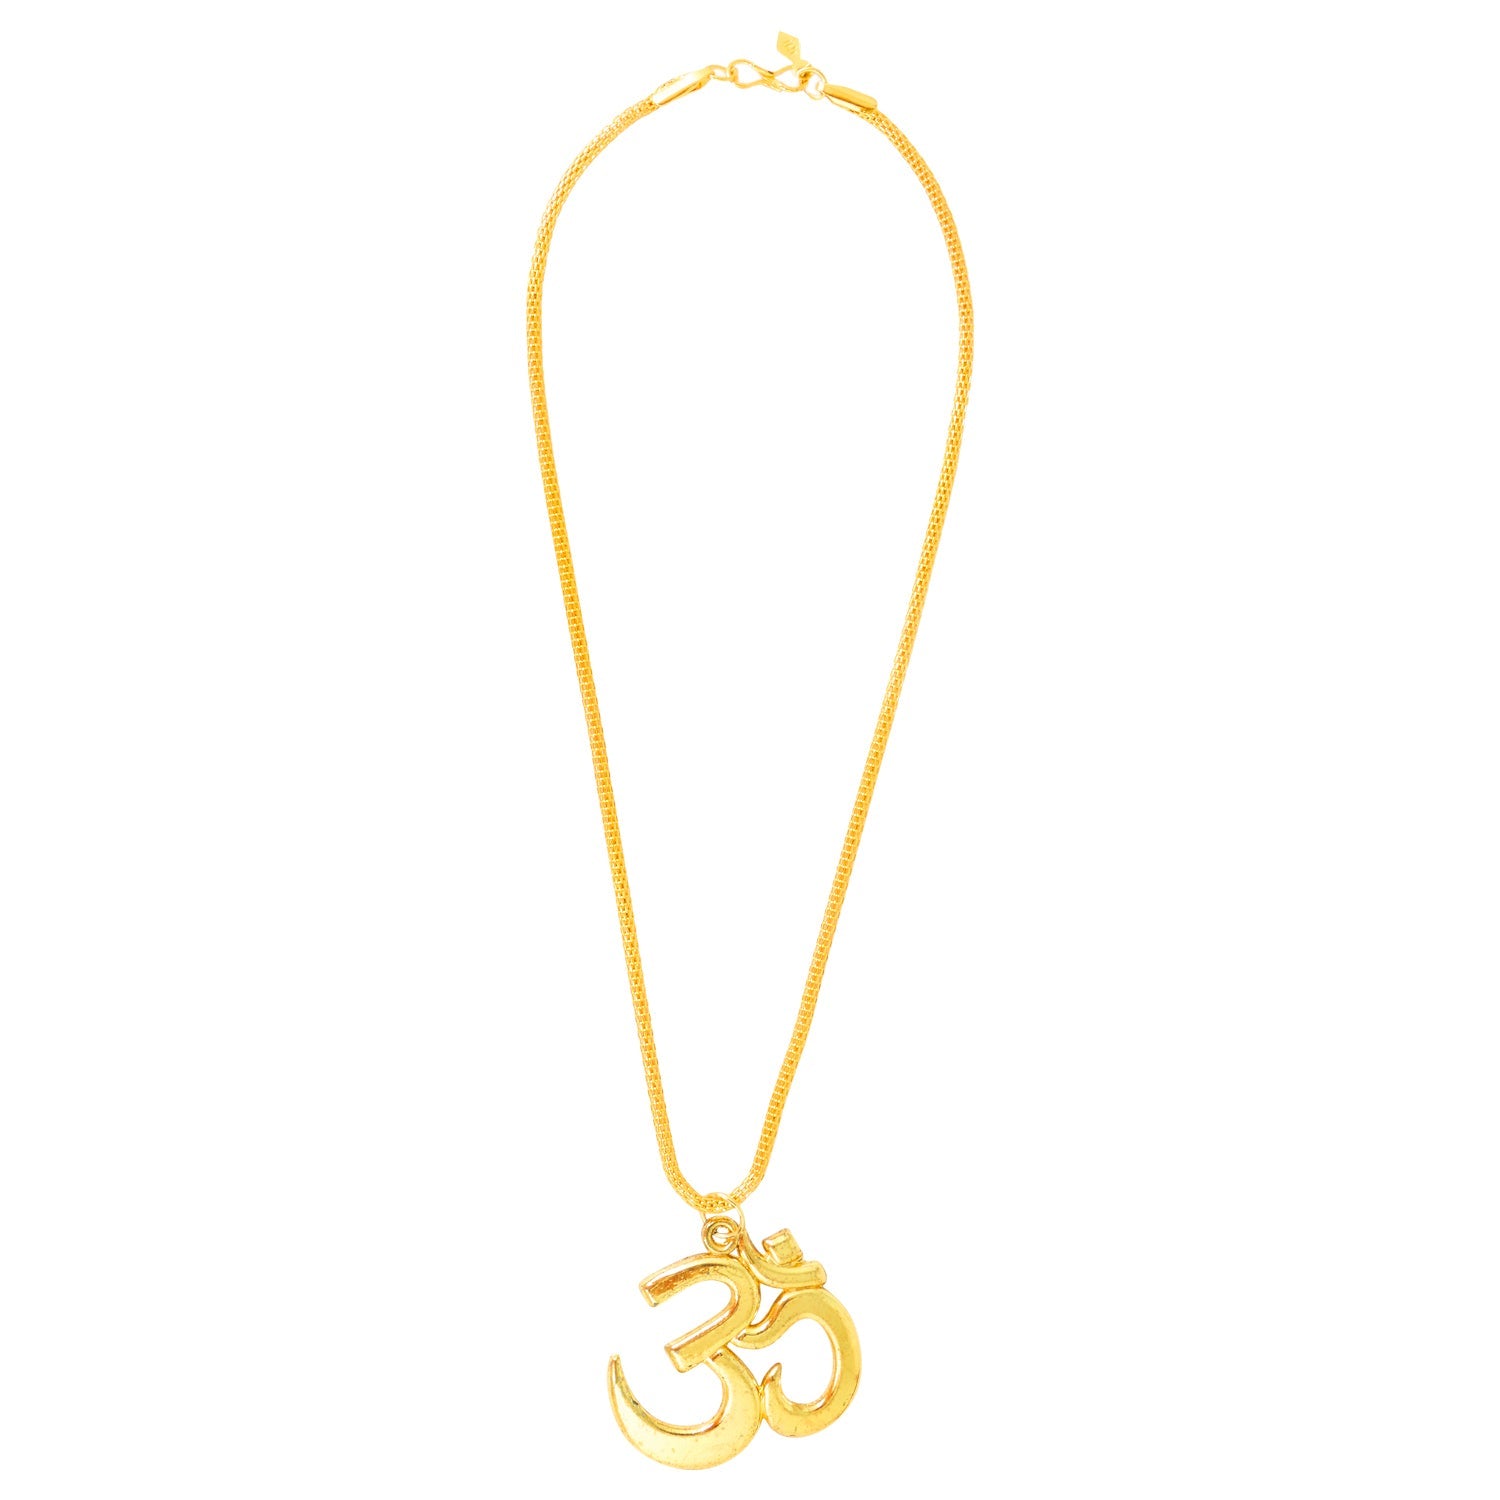 Men's Designer Necklaces and Pendants | Gold & Leather | Tiffany & Co.